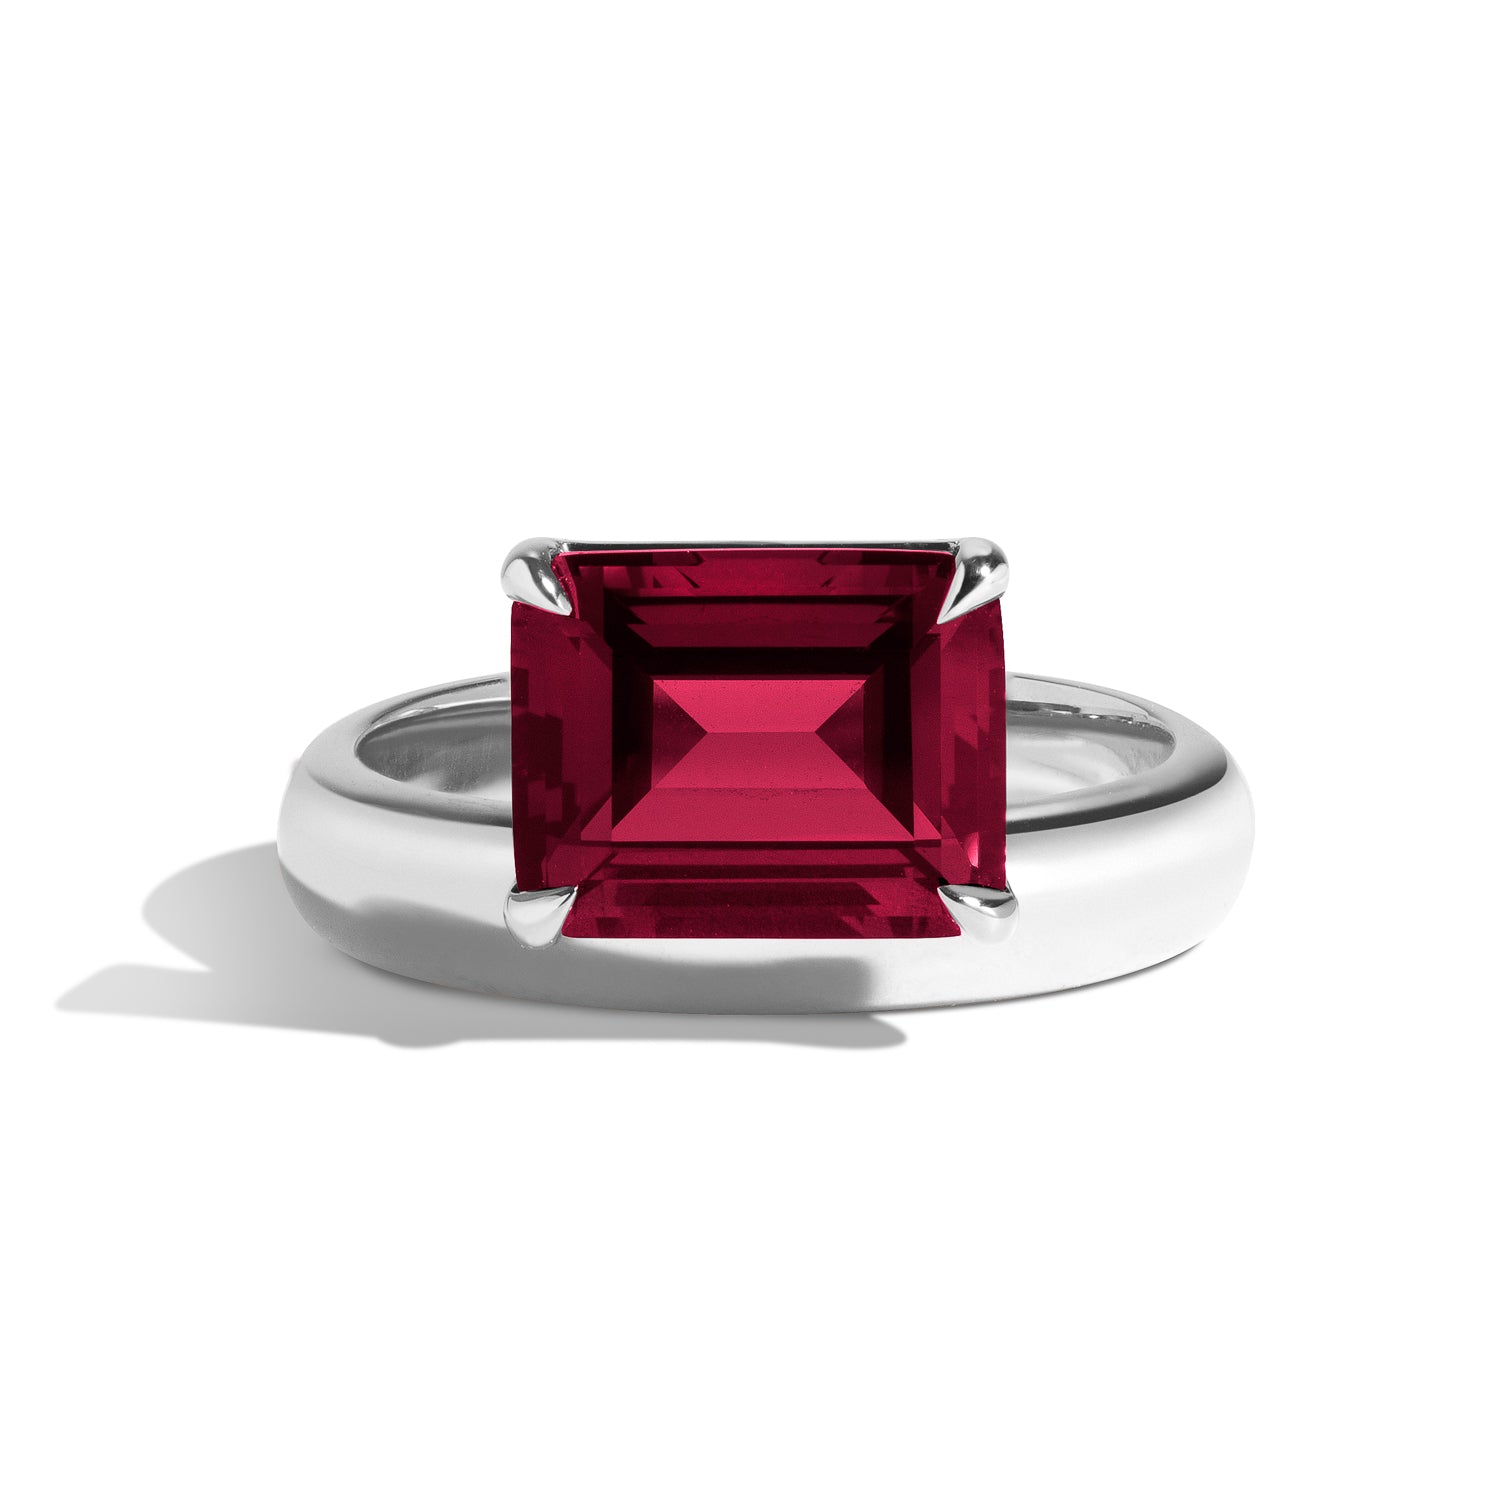 Shahla Karimi Jewelry Wright Emerald Cut Ruby Offset Donut Ring 14K White Gold or Platinum